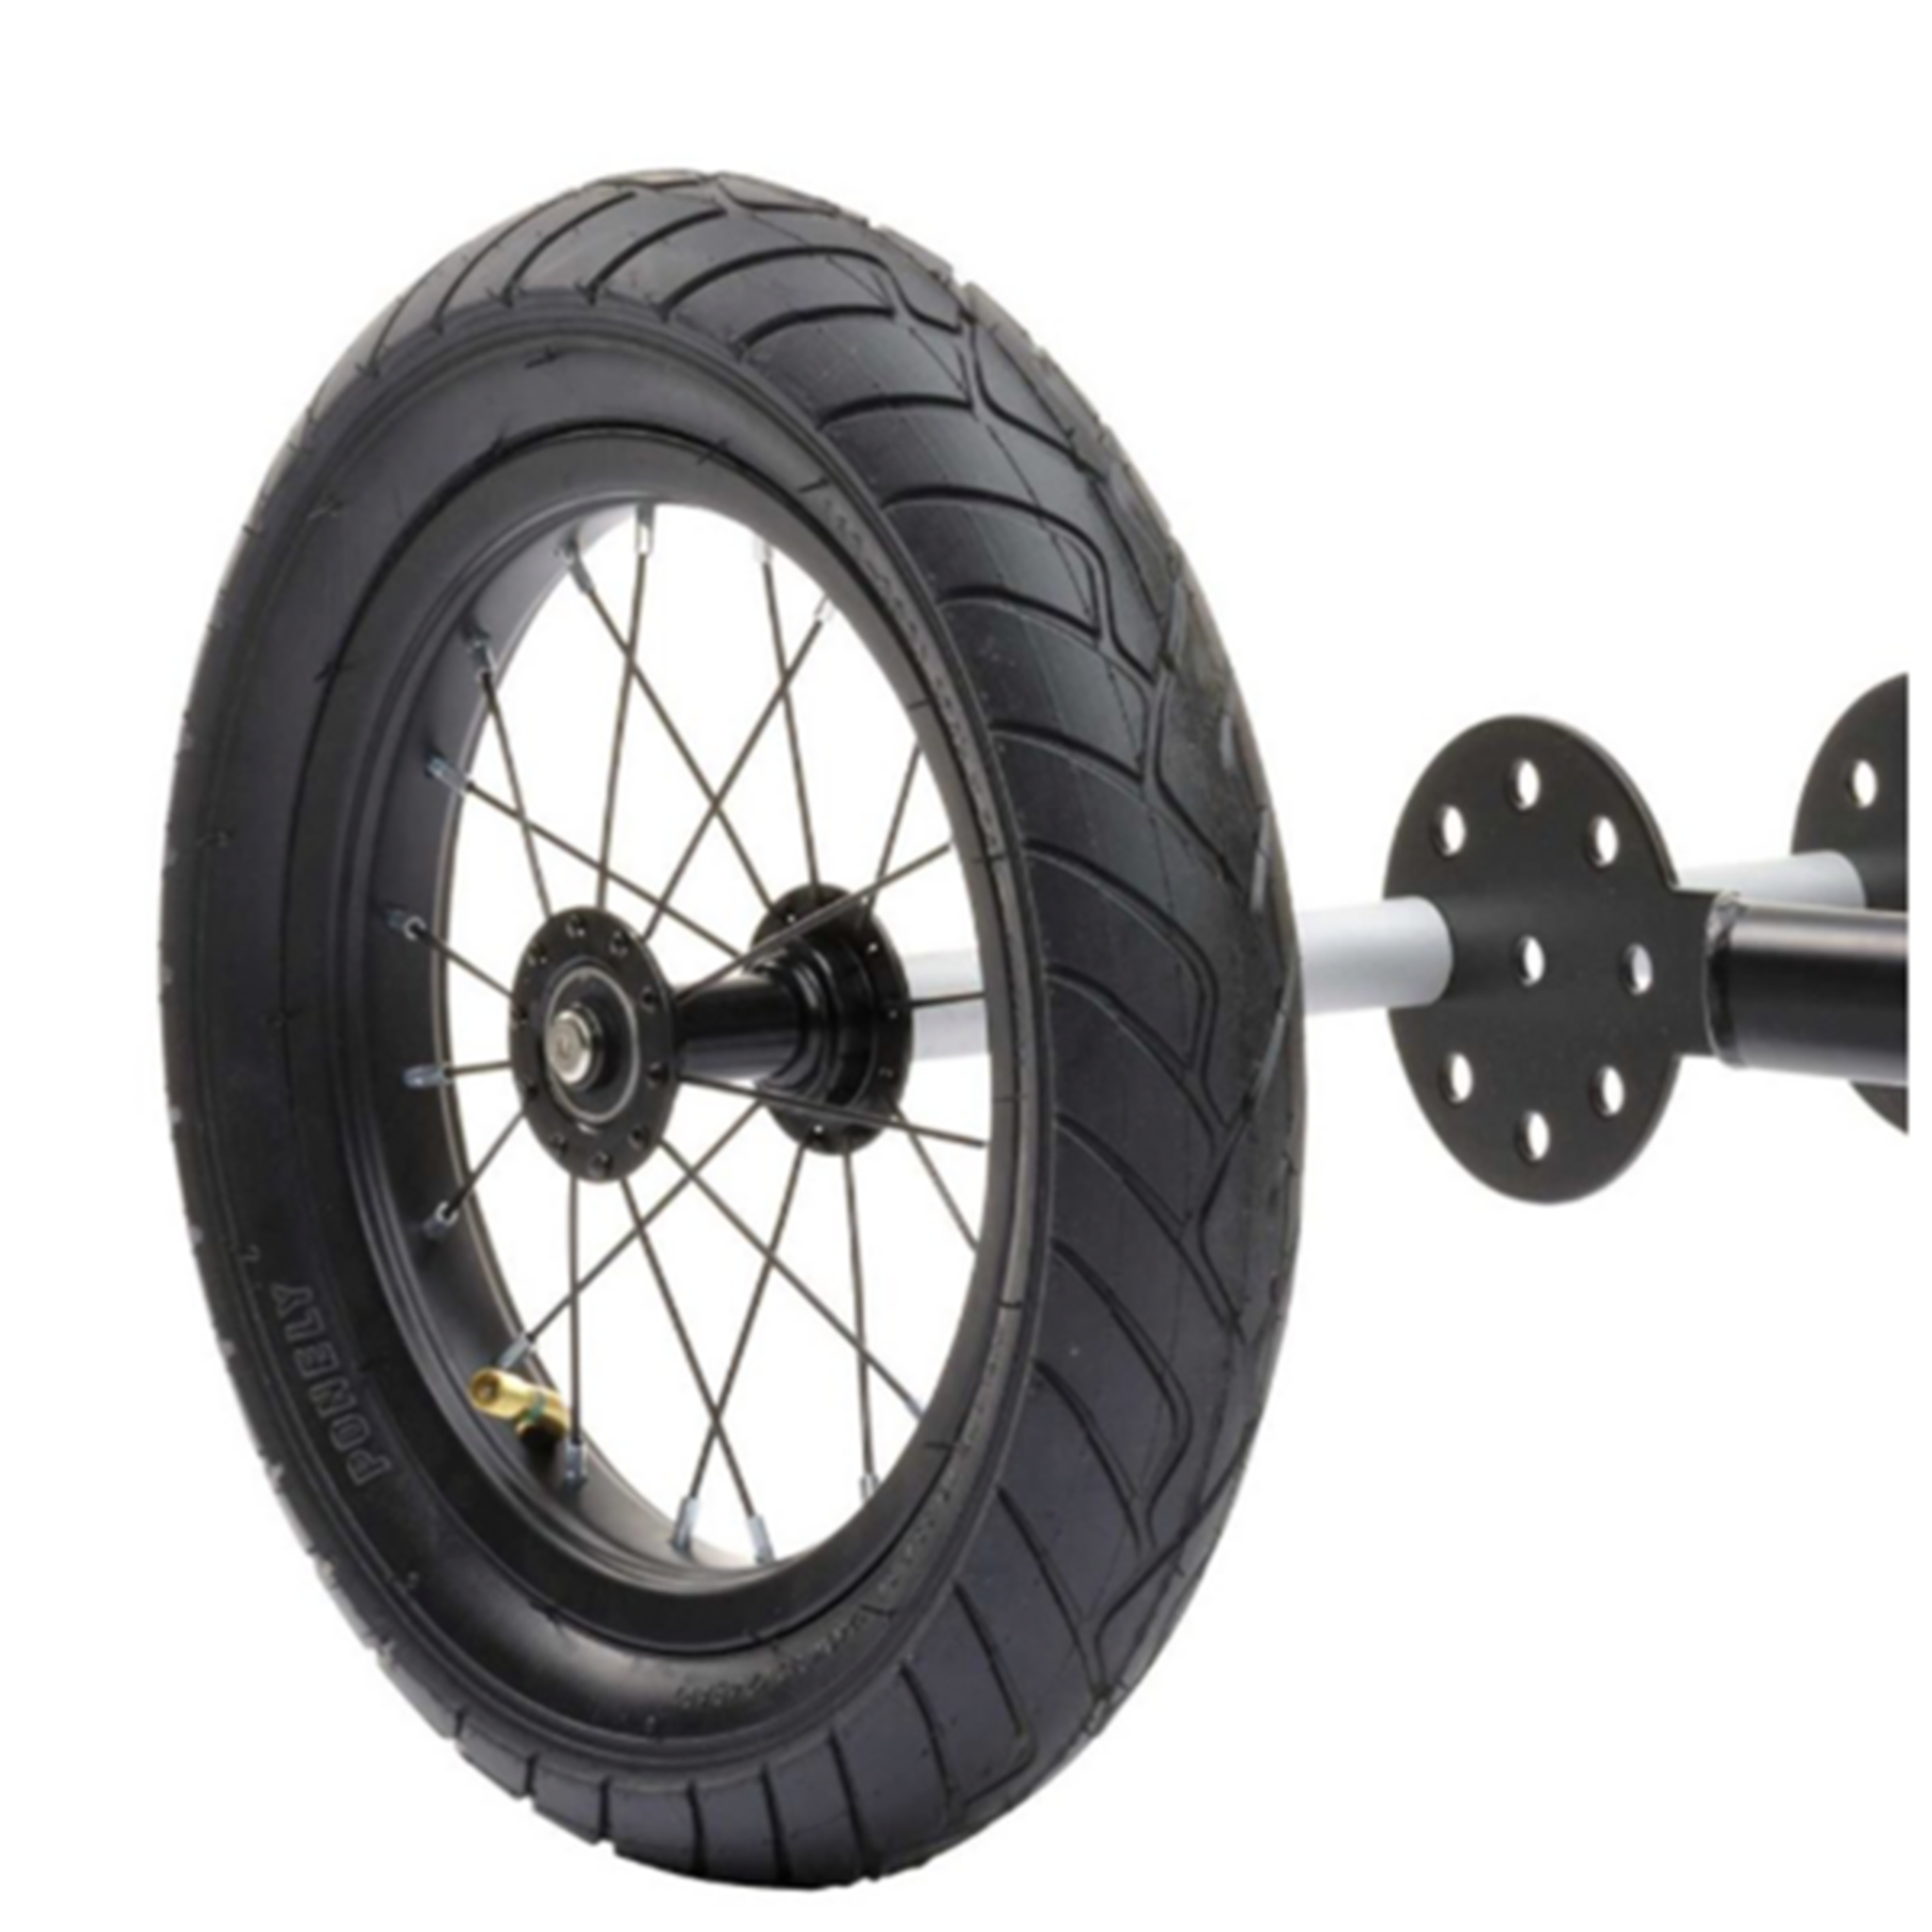 Trybike Extra Wheel From 2 to 3 Wheels